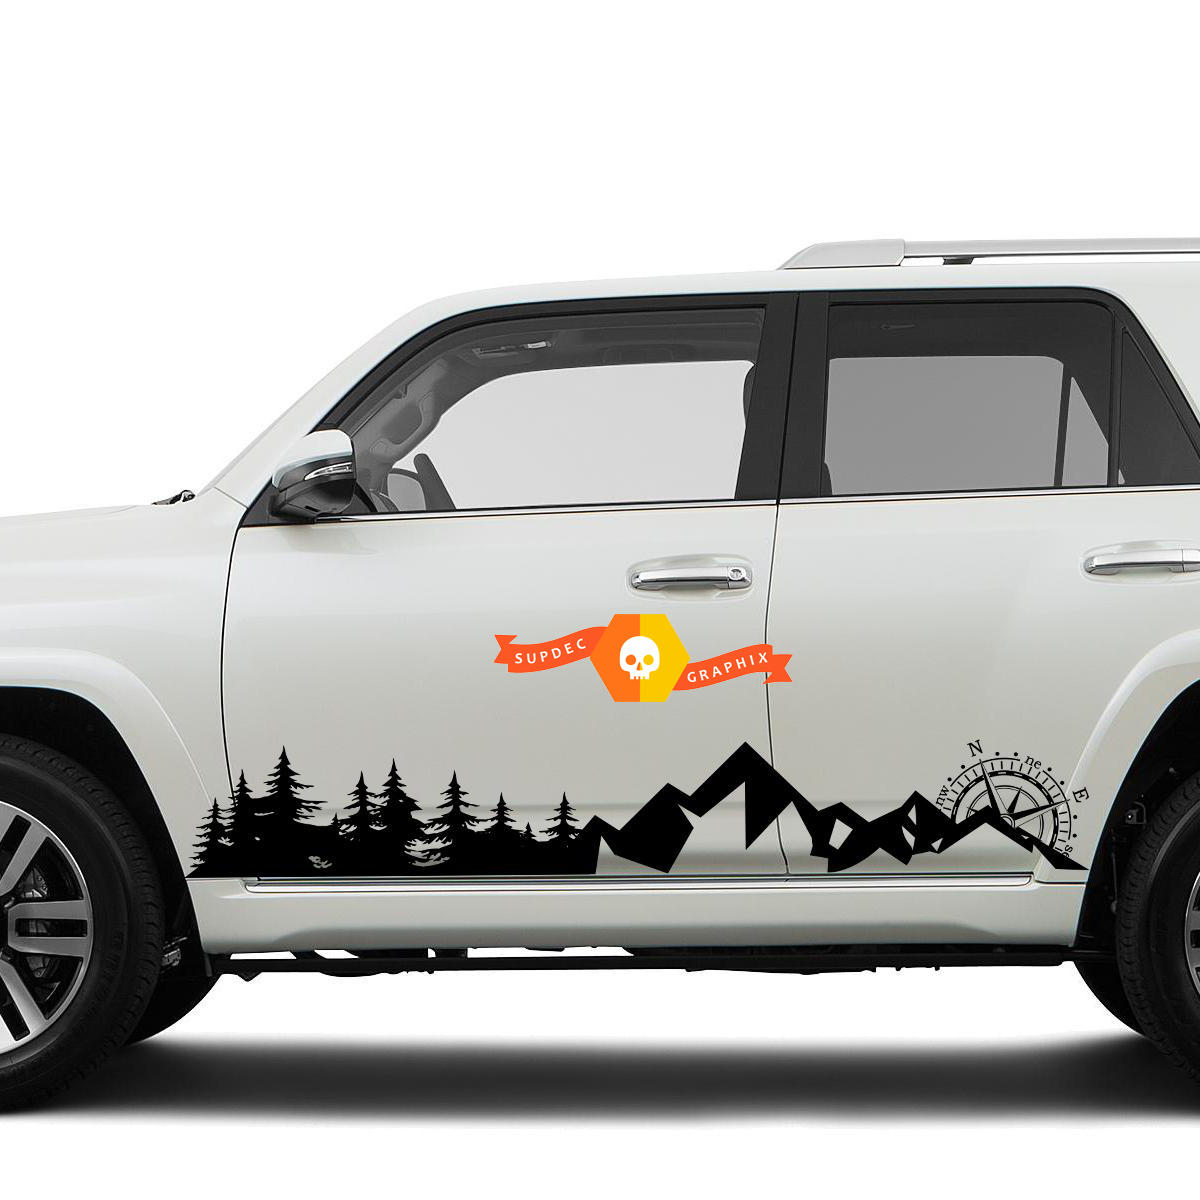 Side Trees Mountains and Compass Rocker side travel Vinyl Sticker Decal fit to Toyota 4Runner 2013 - 2020 TRD Fifth generation